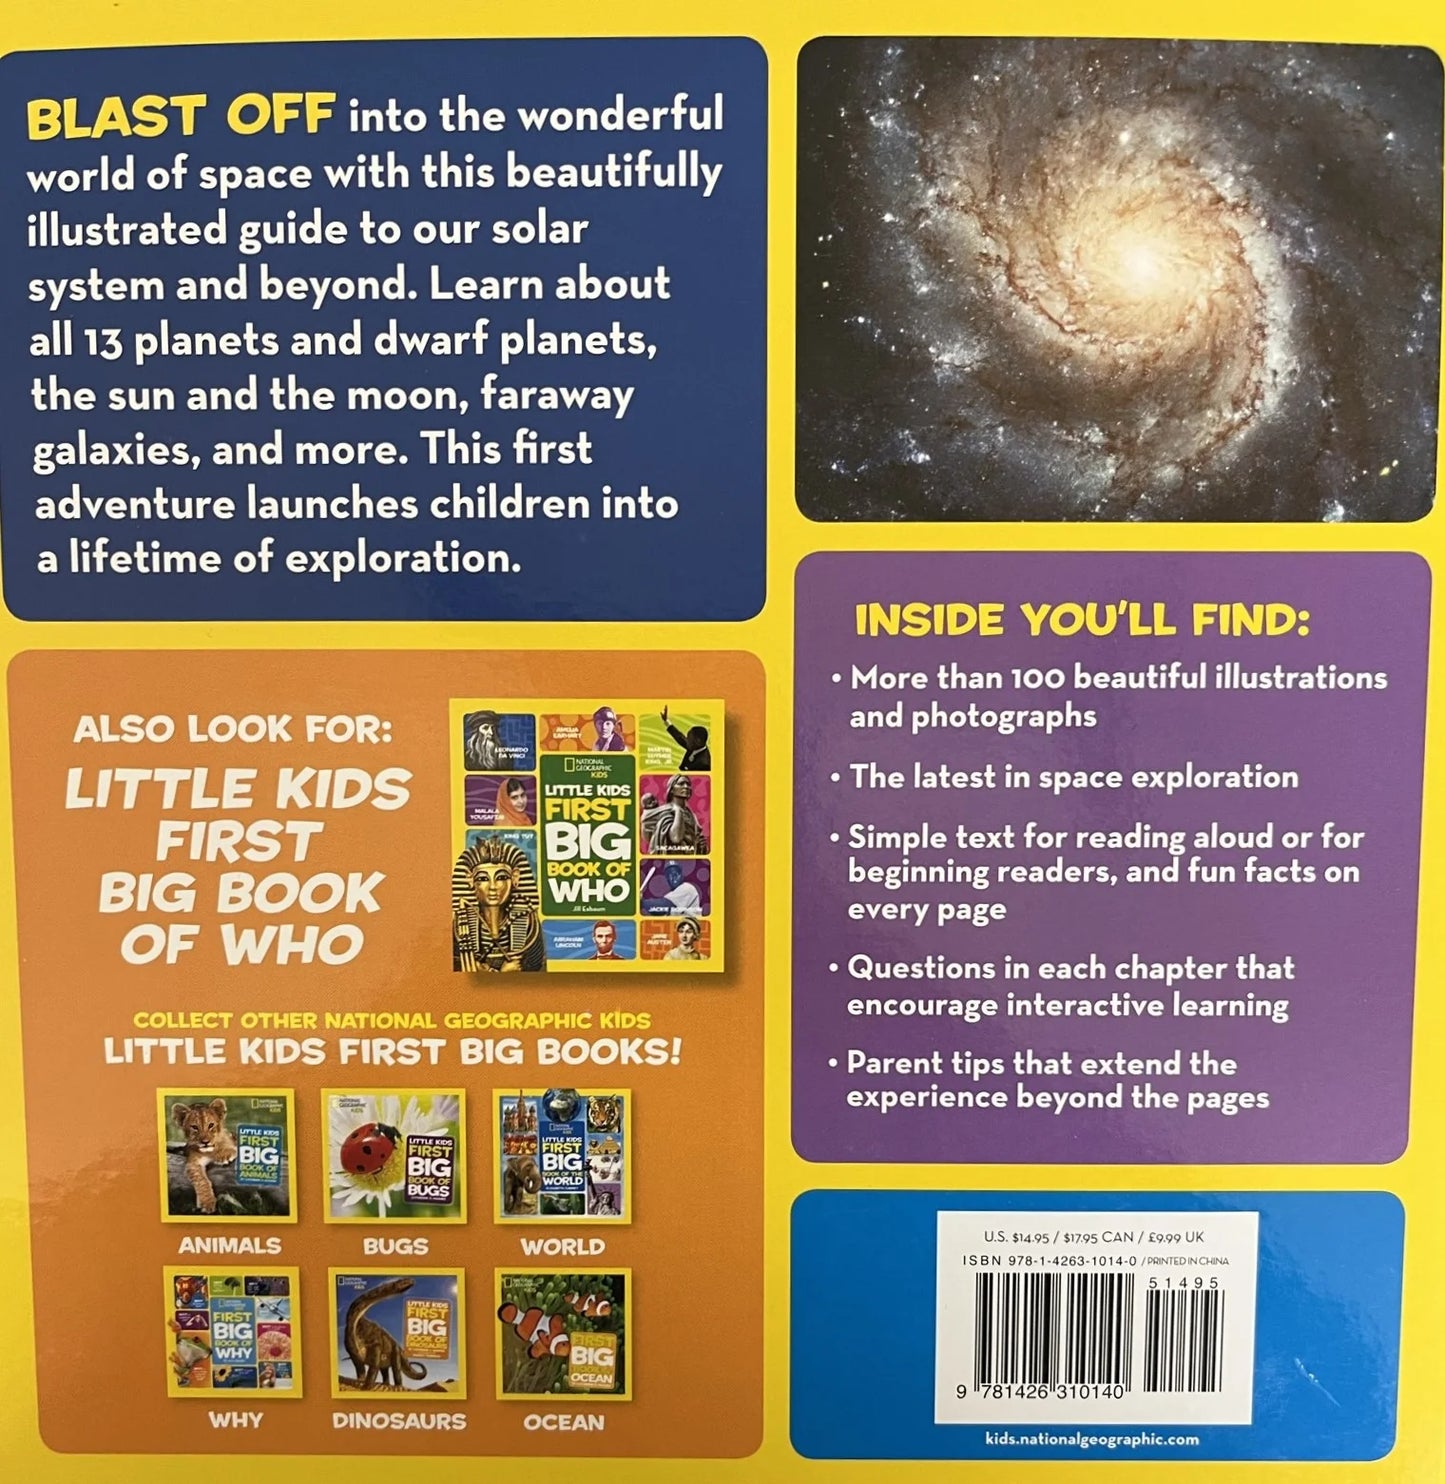 National Geographic Little Kids First Big Book of Space - MakoStars Online Store